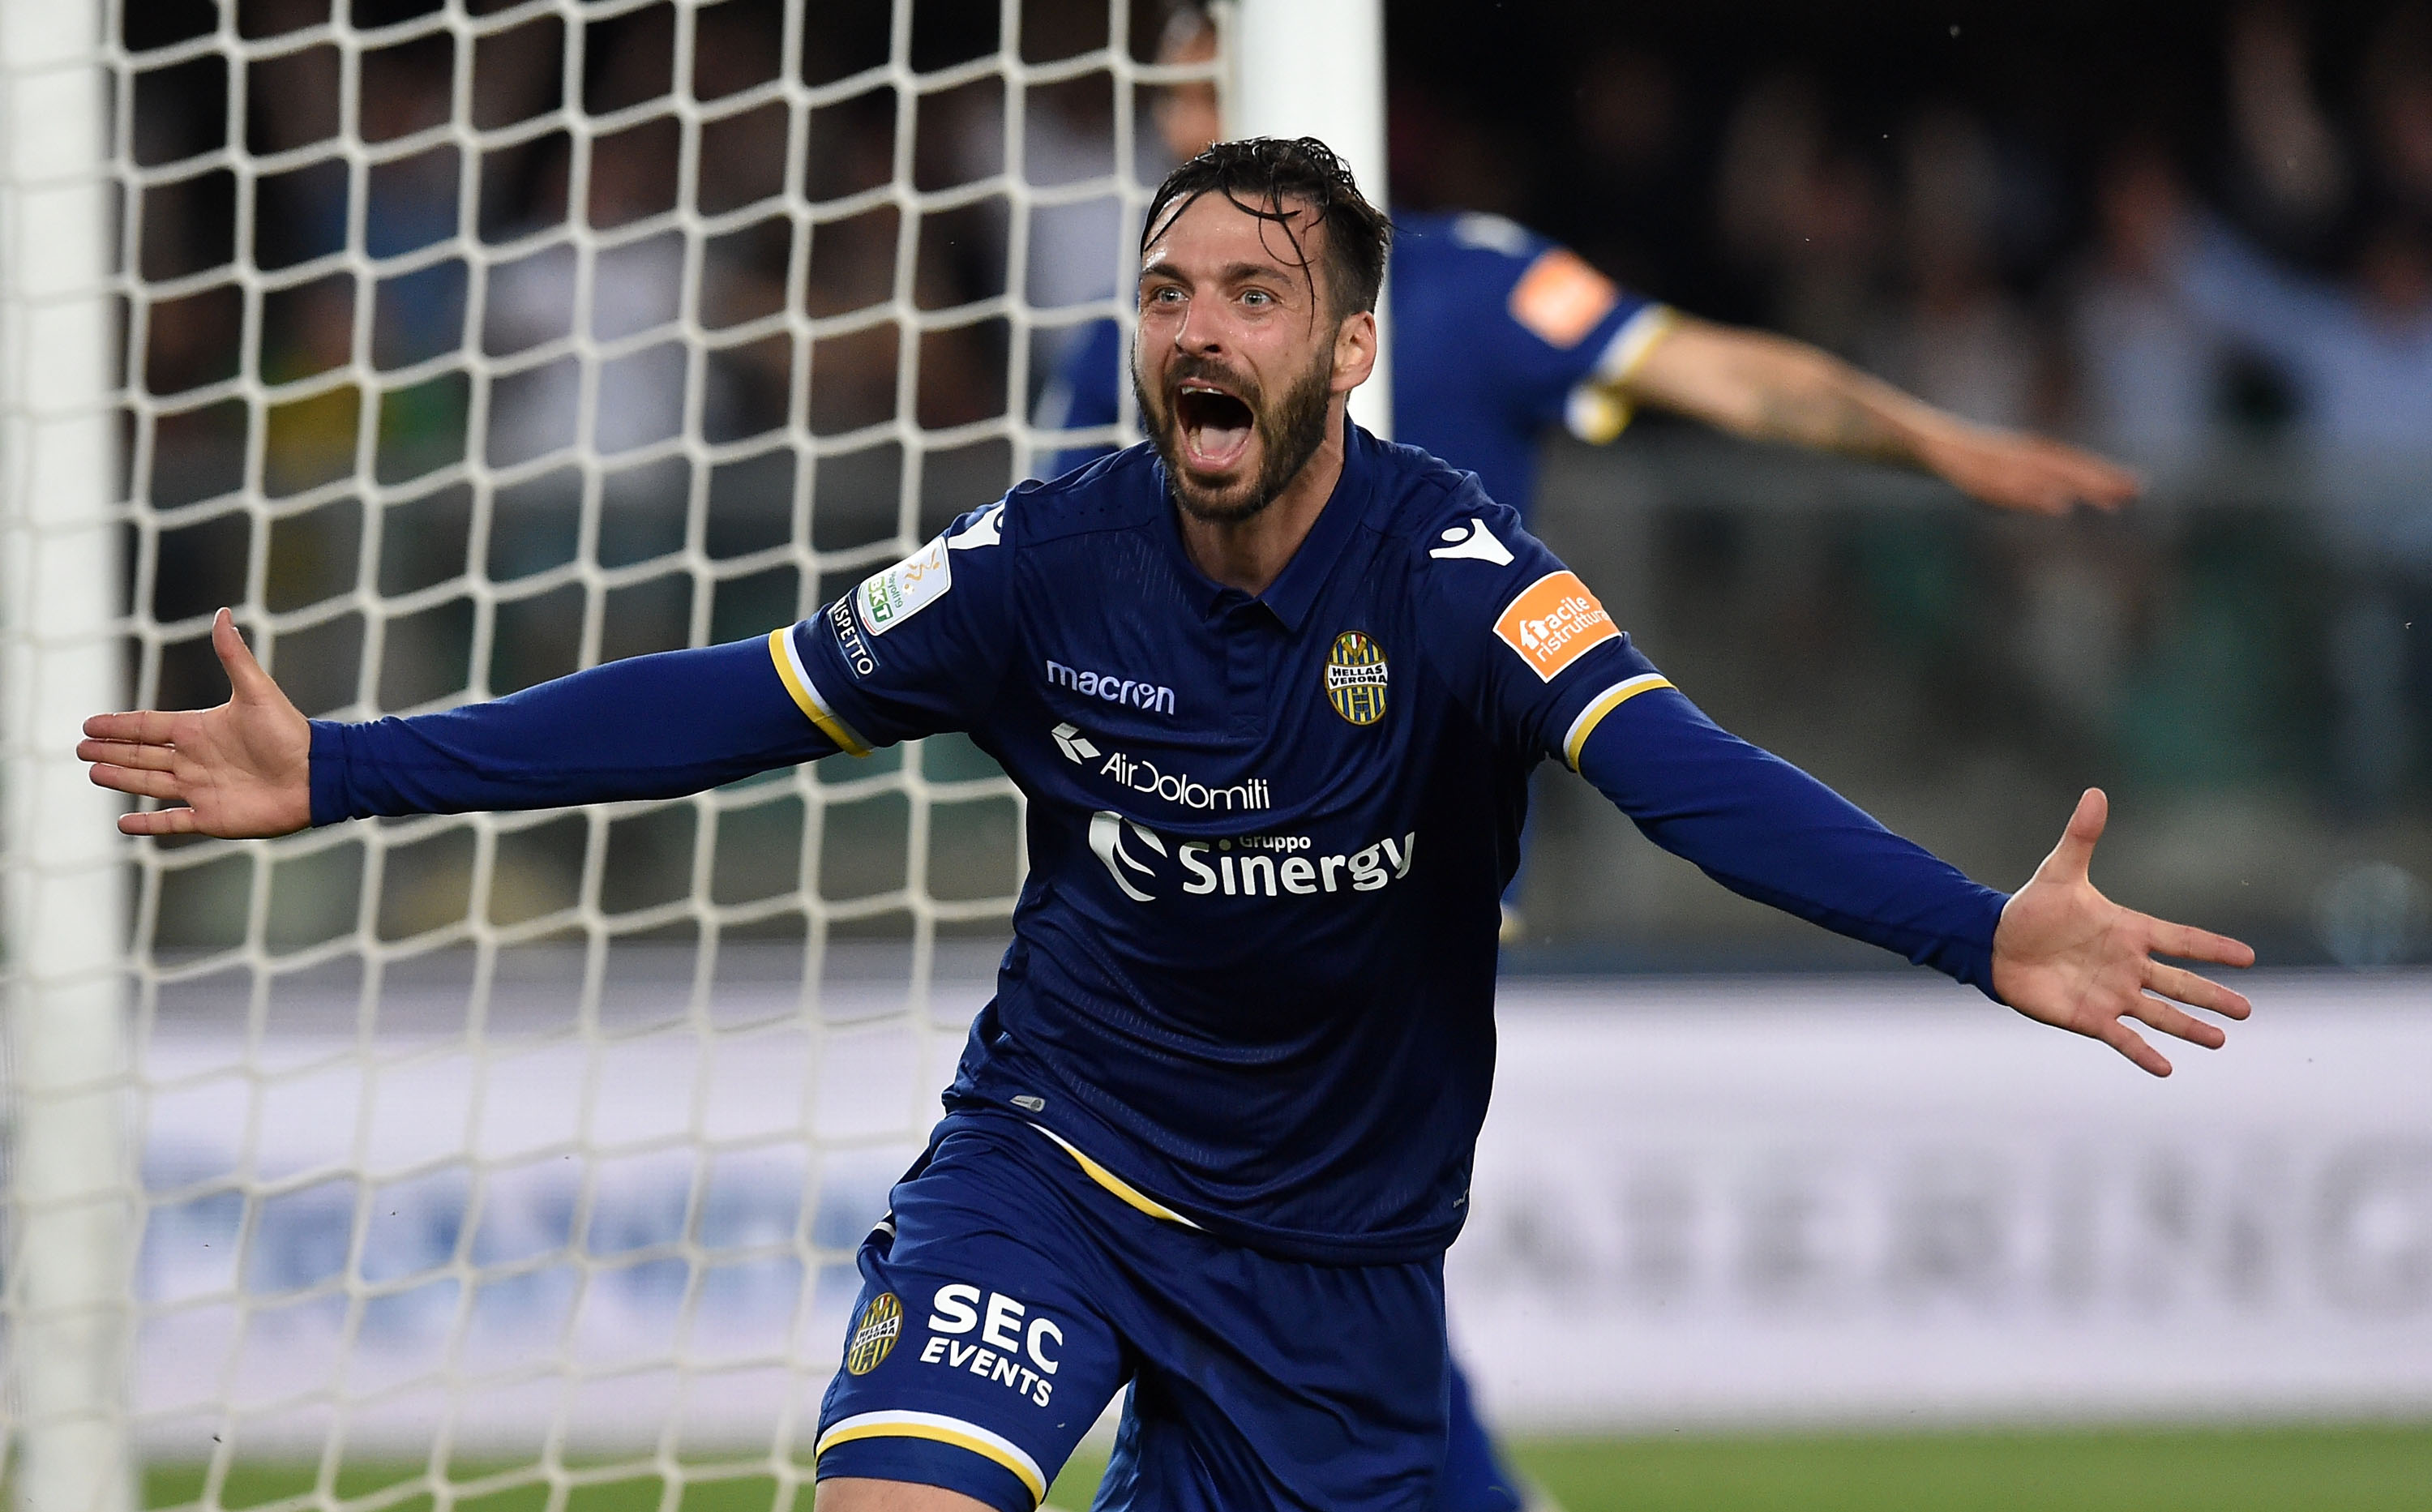 VERONA, ITALY - JUNE 02: Samuel Di Carmine of Hellas Verona celebrates after scoring goal 2-0 during the Serie B Playoff Final second leg match between Hellas Verona and AS Cittadella at Stadio Marcantonio Bentegodi on June 2, 2019 in Verona, Italy.  (Photo by Giuseppe Bellini/Getty Images for Lega Serie B)